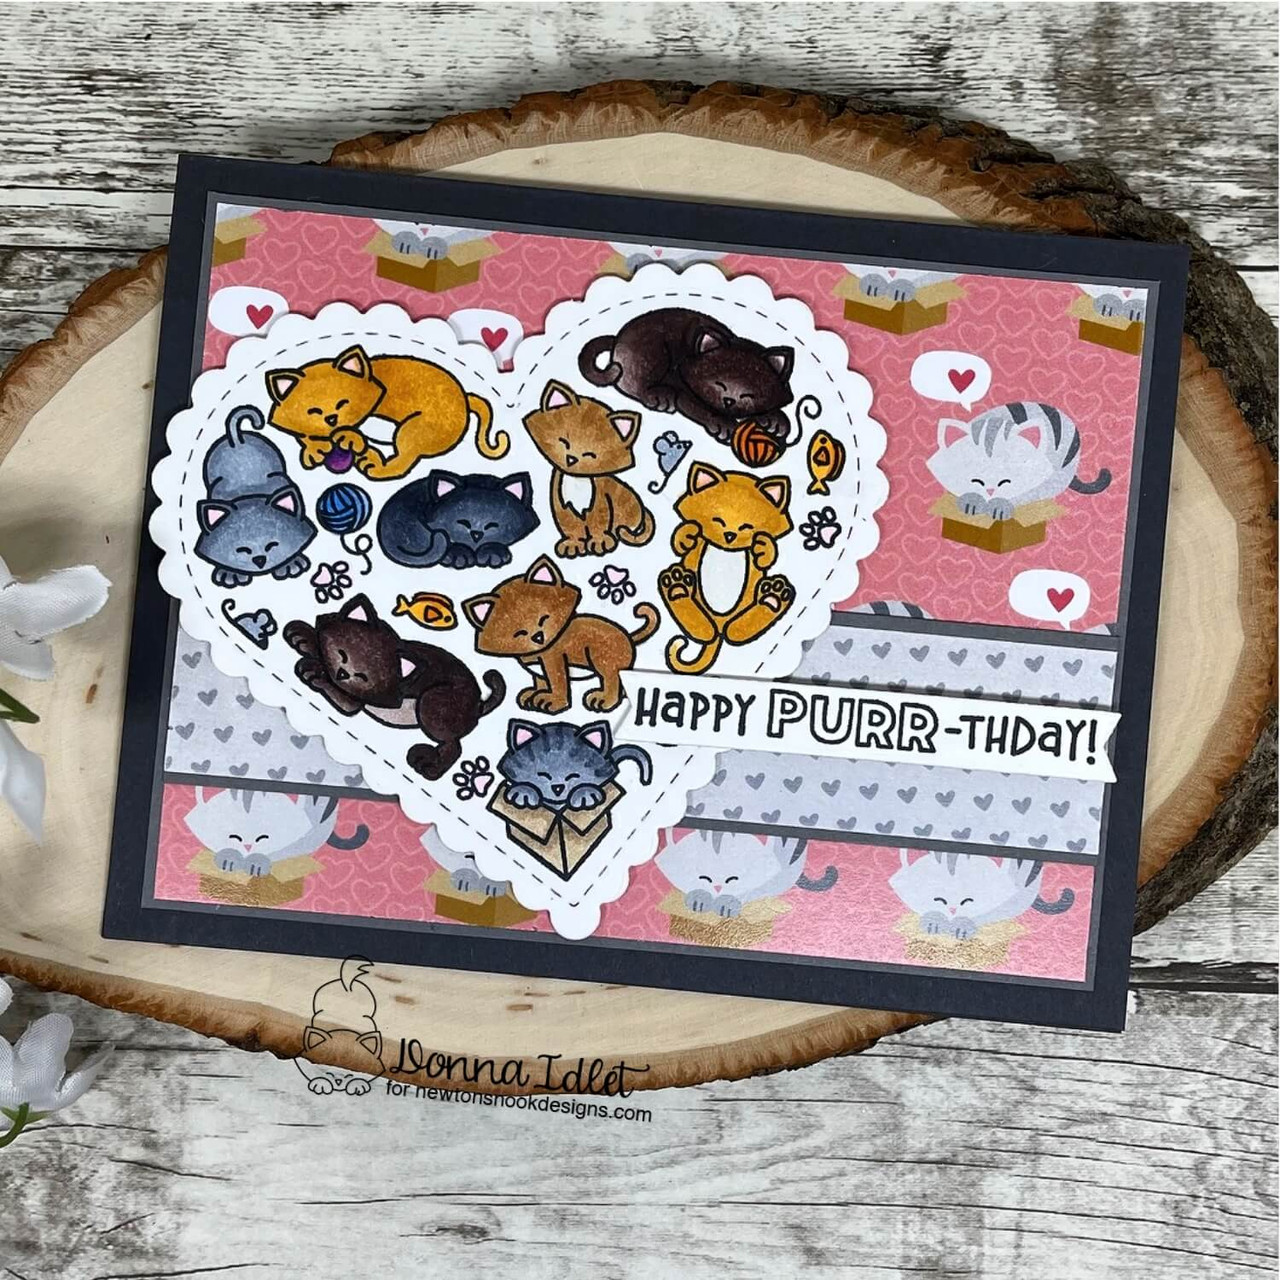 Cute Cat Trio With Hearts  Pet Mat for Sale by BrookndaleCraft